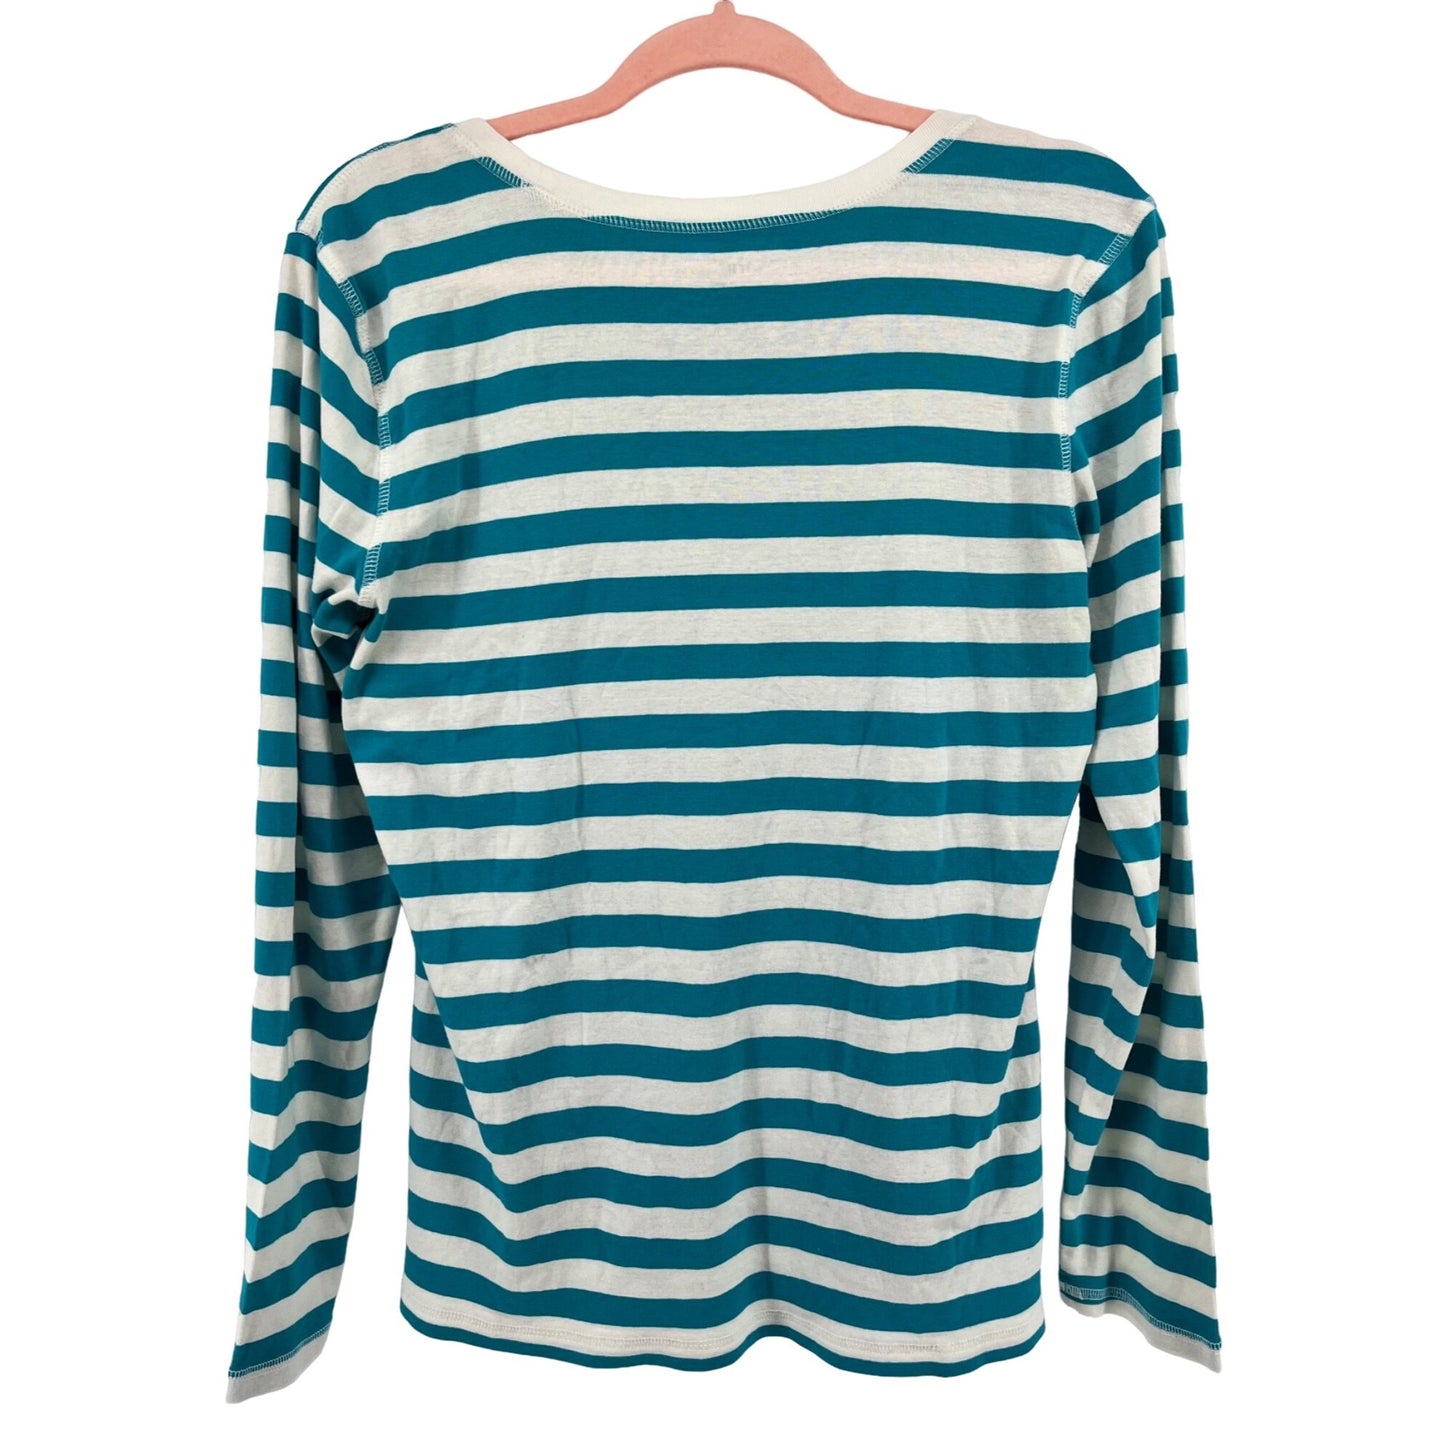 G.H. Bass & Co. Women's Size XL Teal & White Striped Long-Sleeved Top